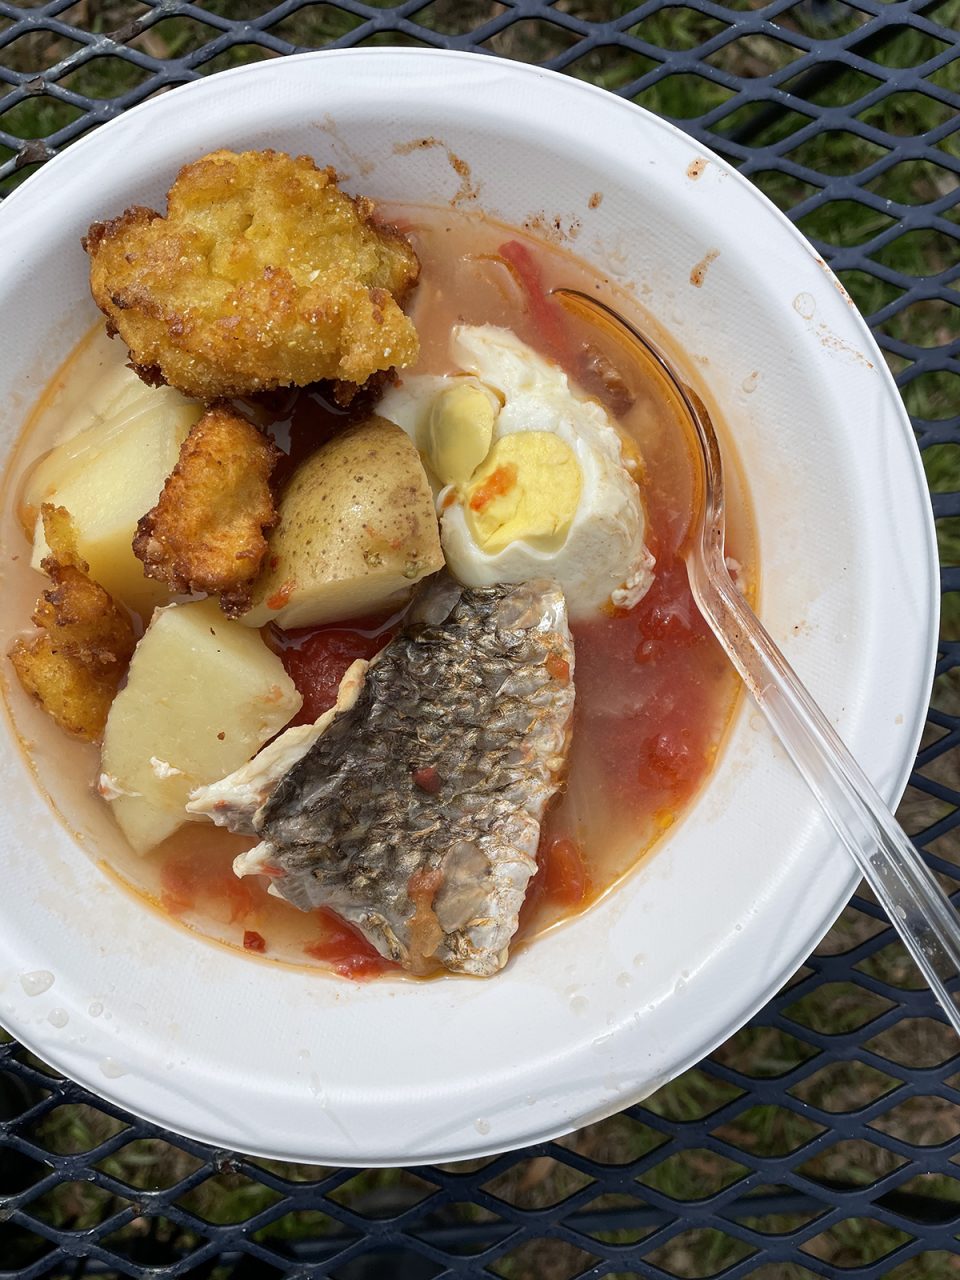 A bowl of Eastern North Carolina fish stew with its obligatory hard-cooked egg and cornbread on the side. Photo: Liz Biro